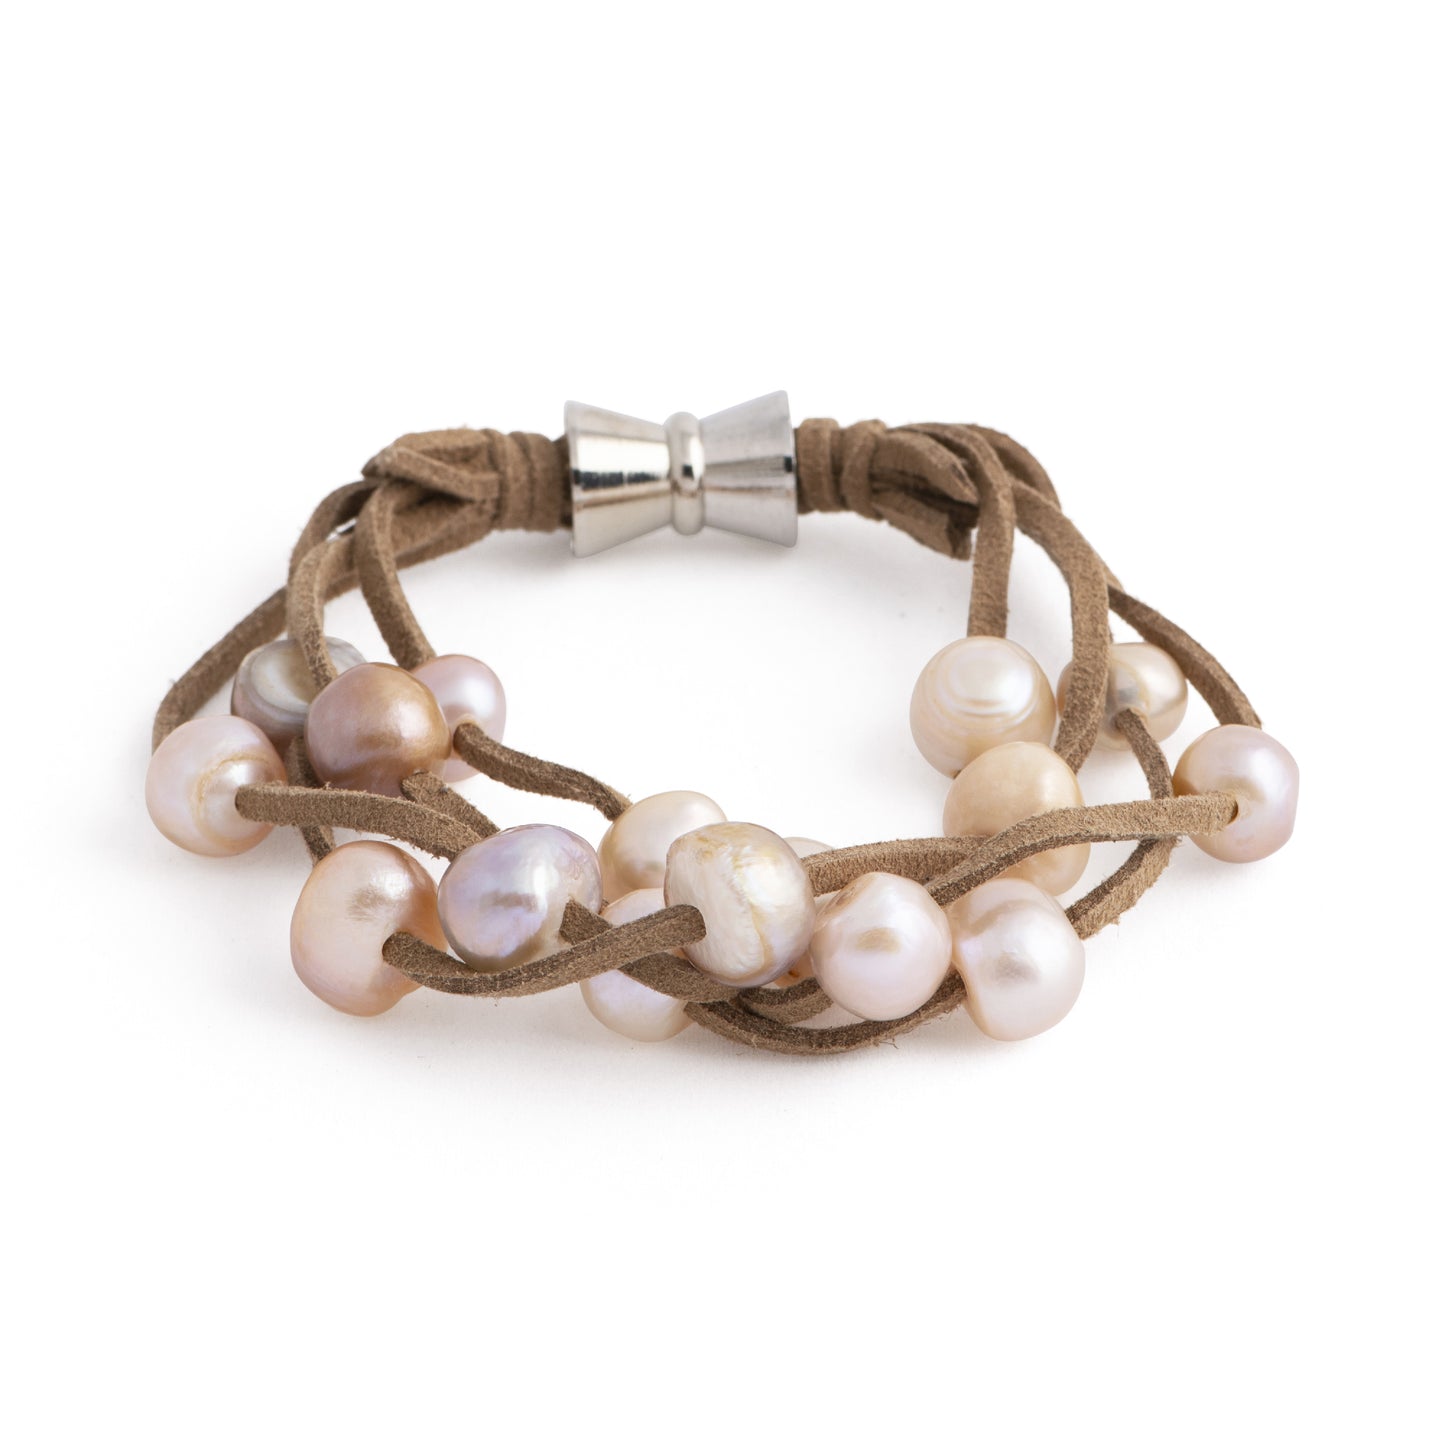 Bengal - Suede multi-layer bracelet with freshwater pearls and magnetic clasp (Tan suede, natural pearls)